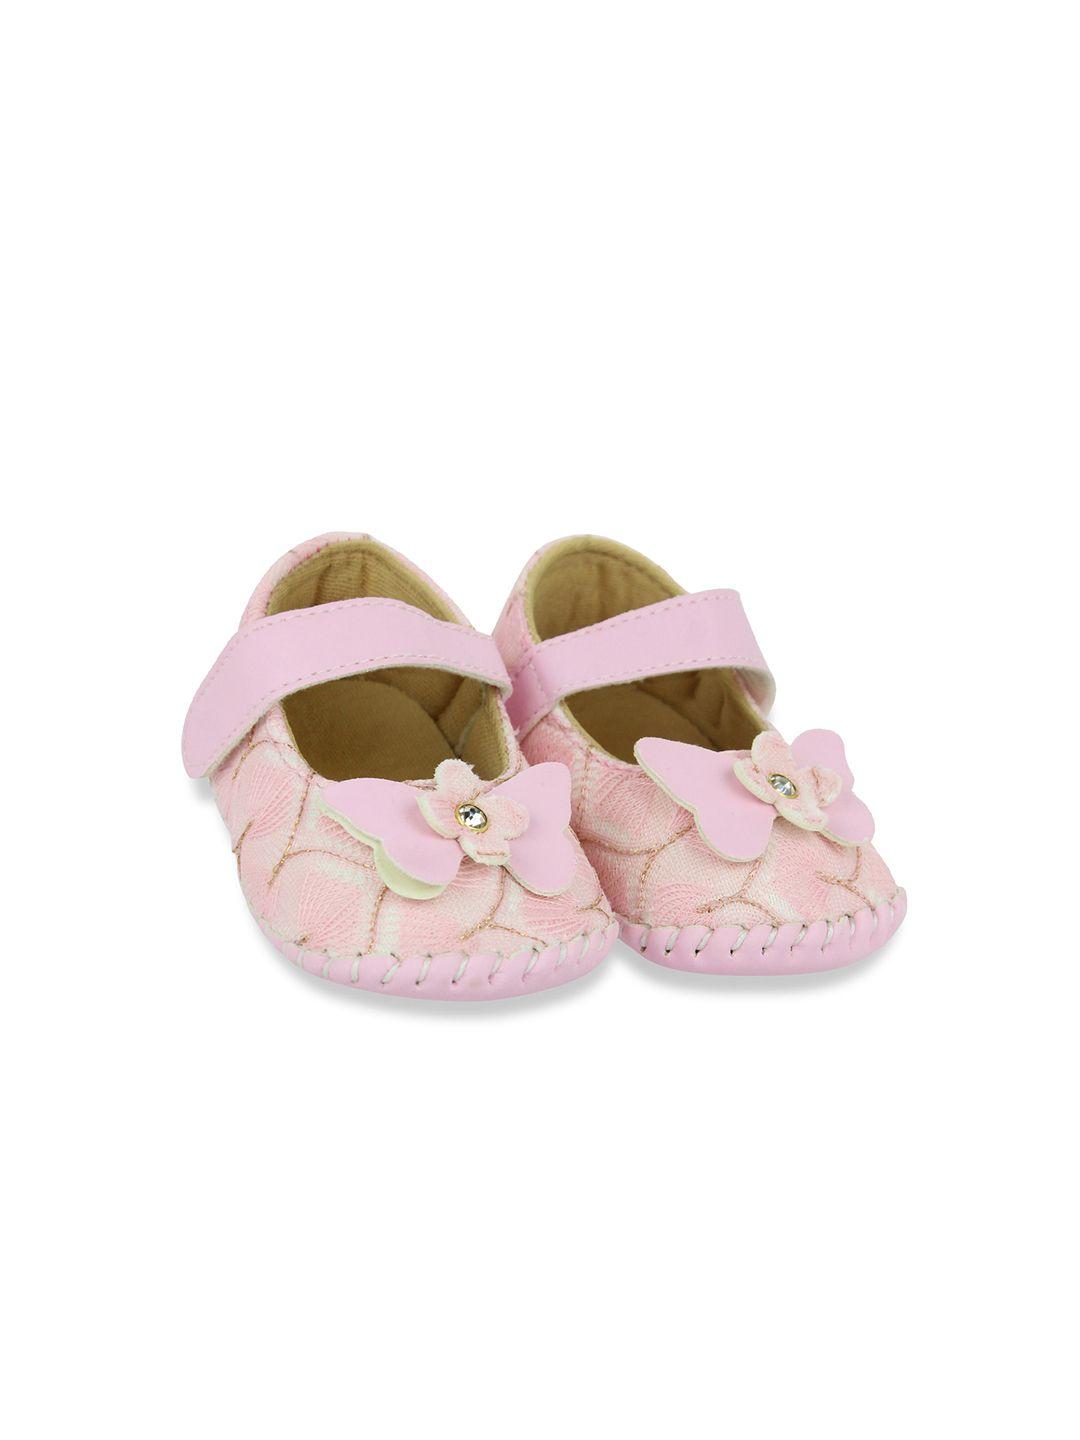 baesd infant girls floral design booties